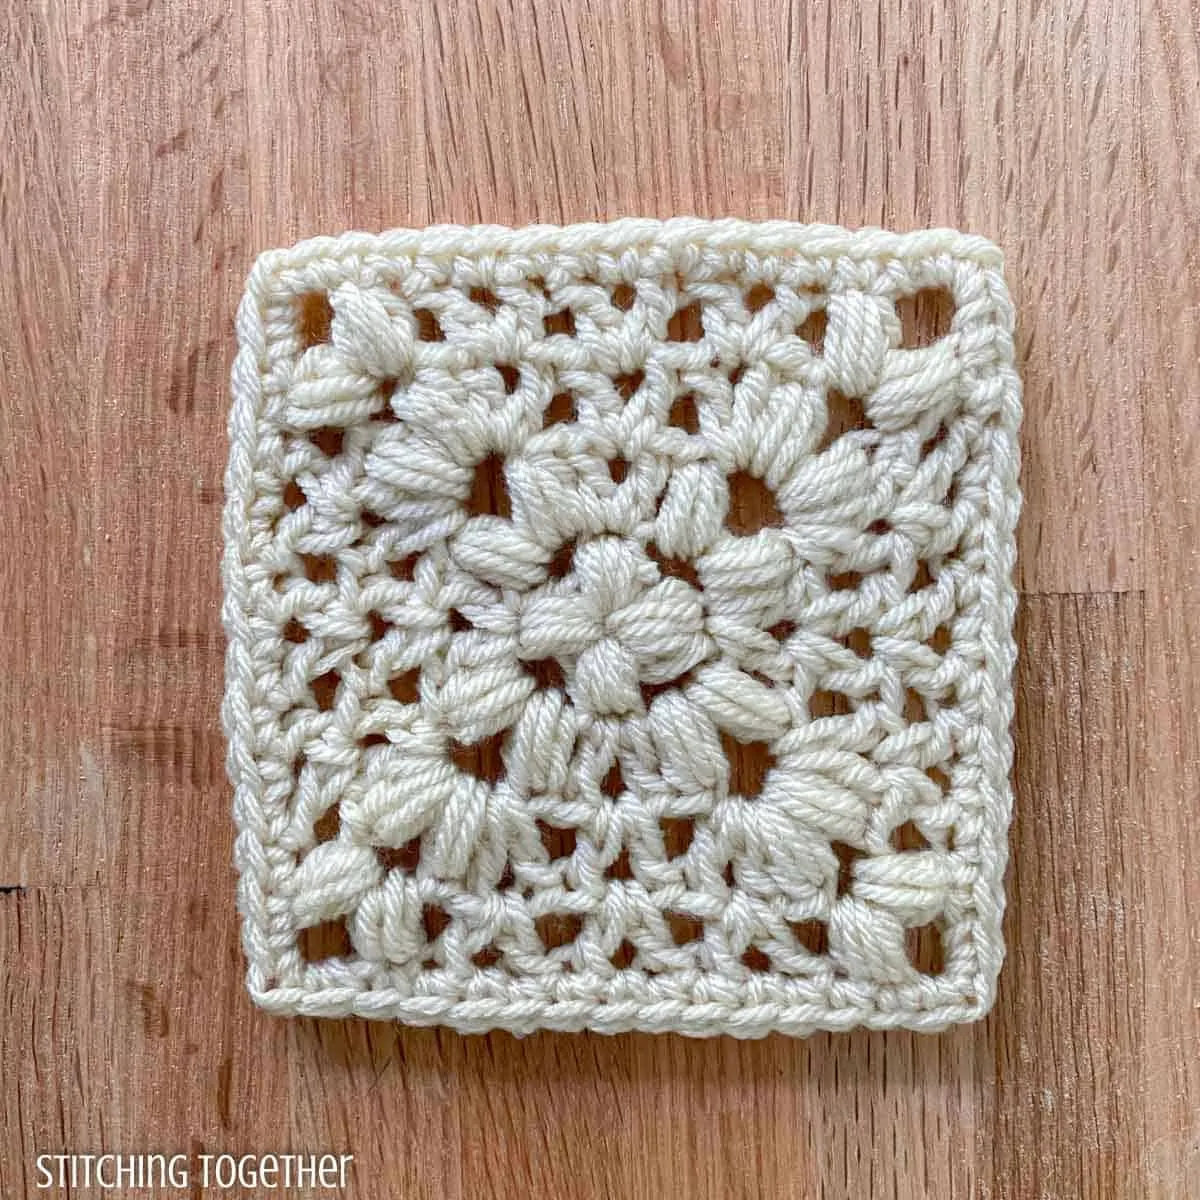 ivory crochet granny square with open stitches